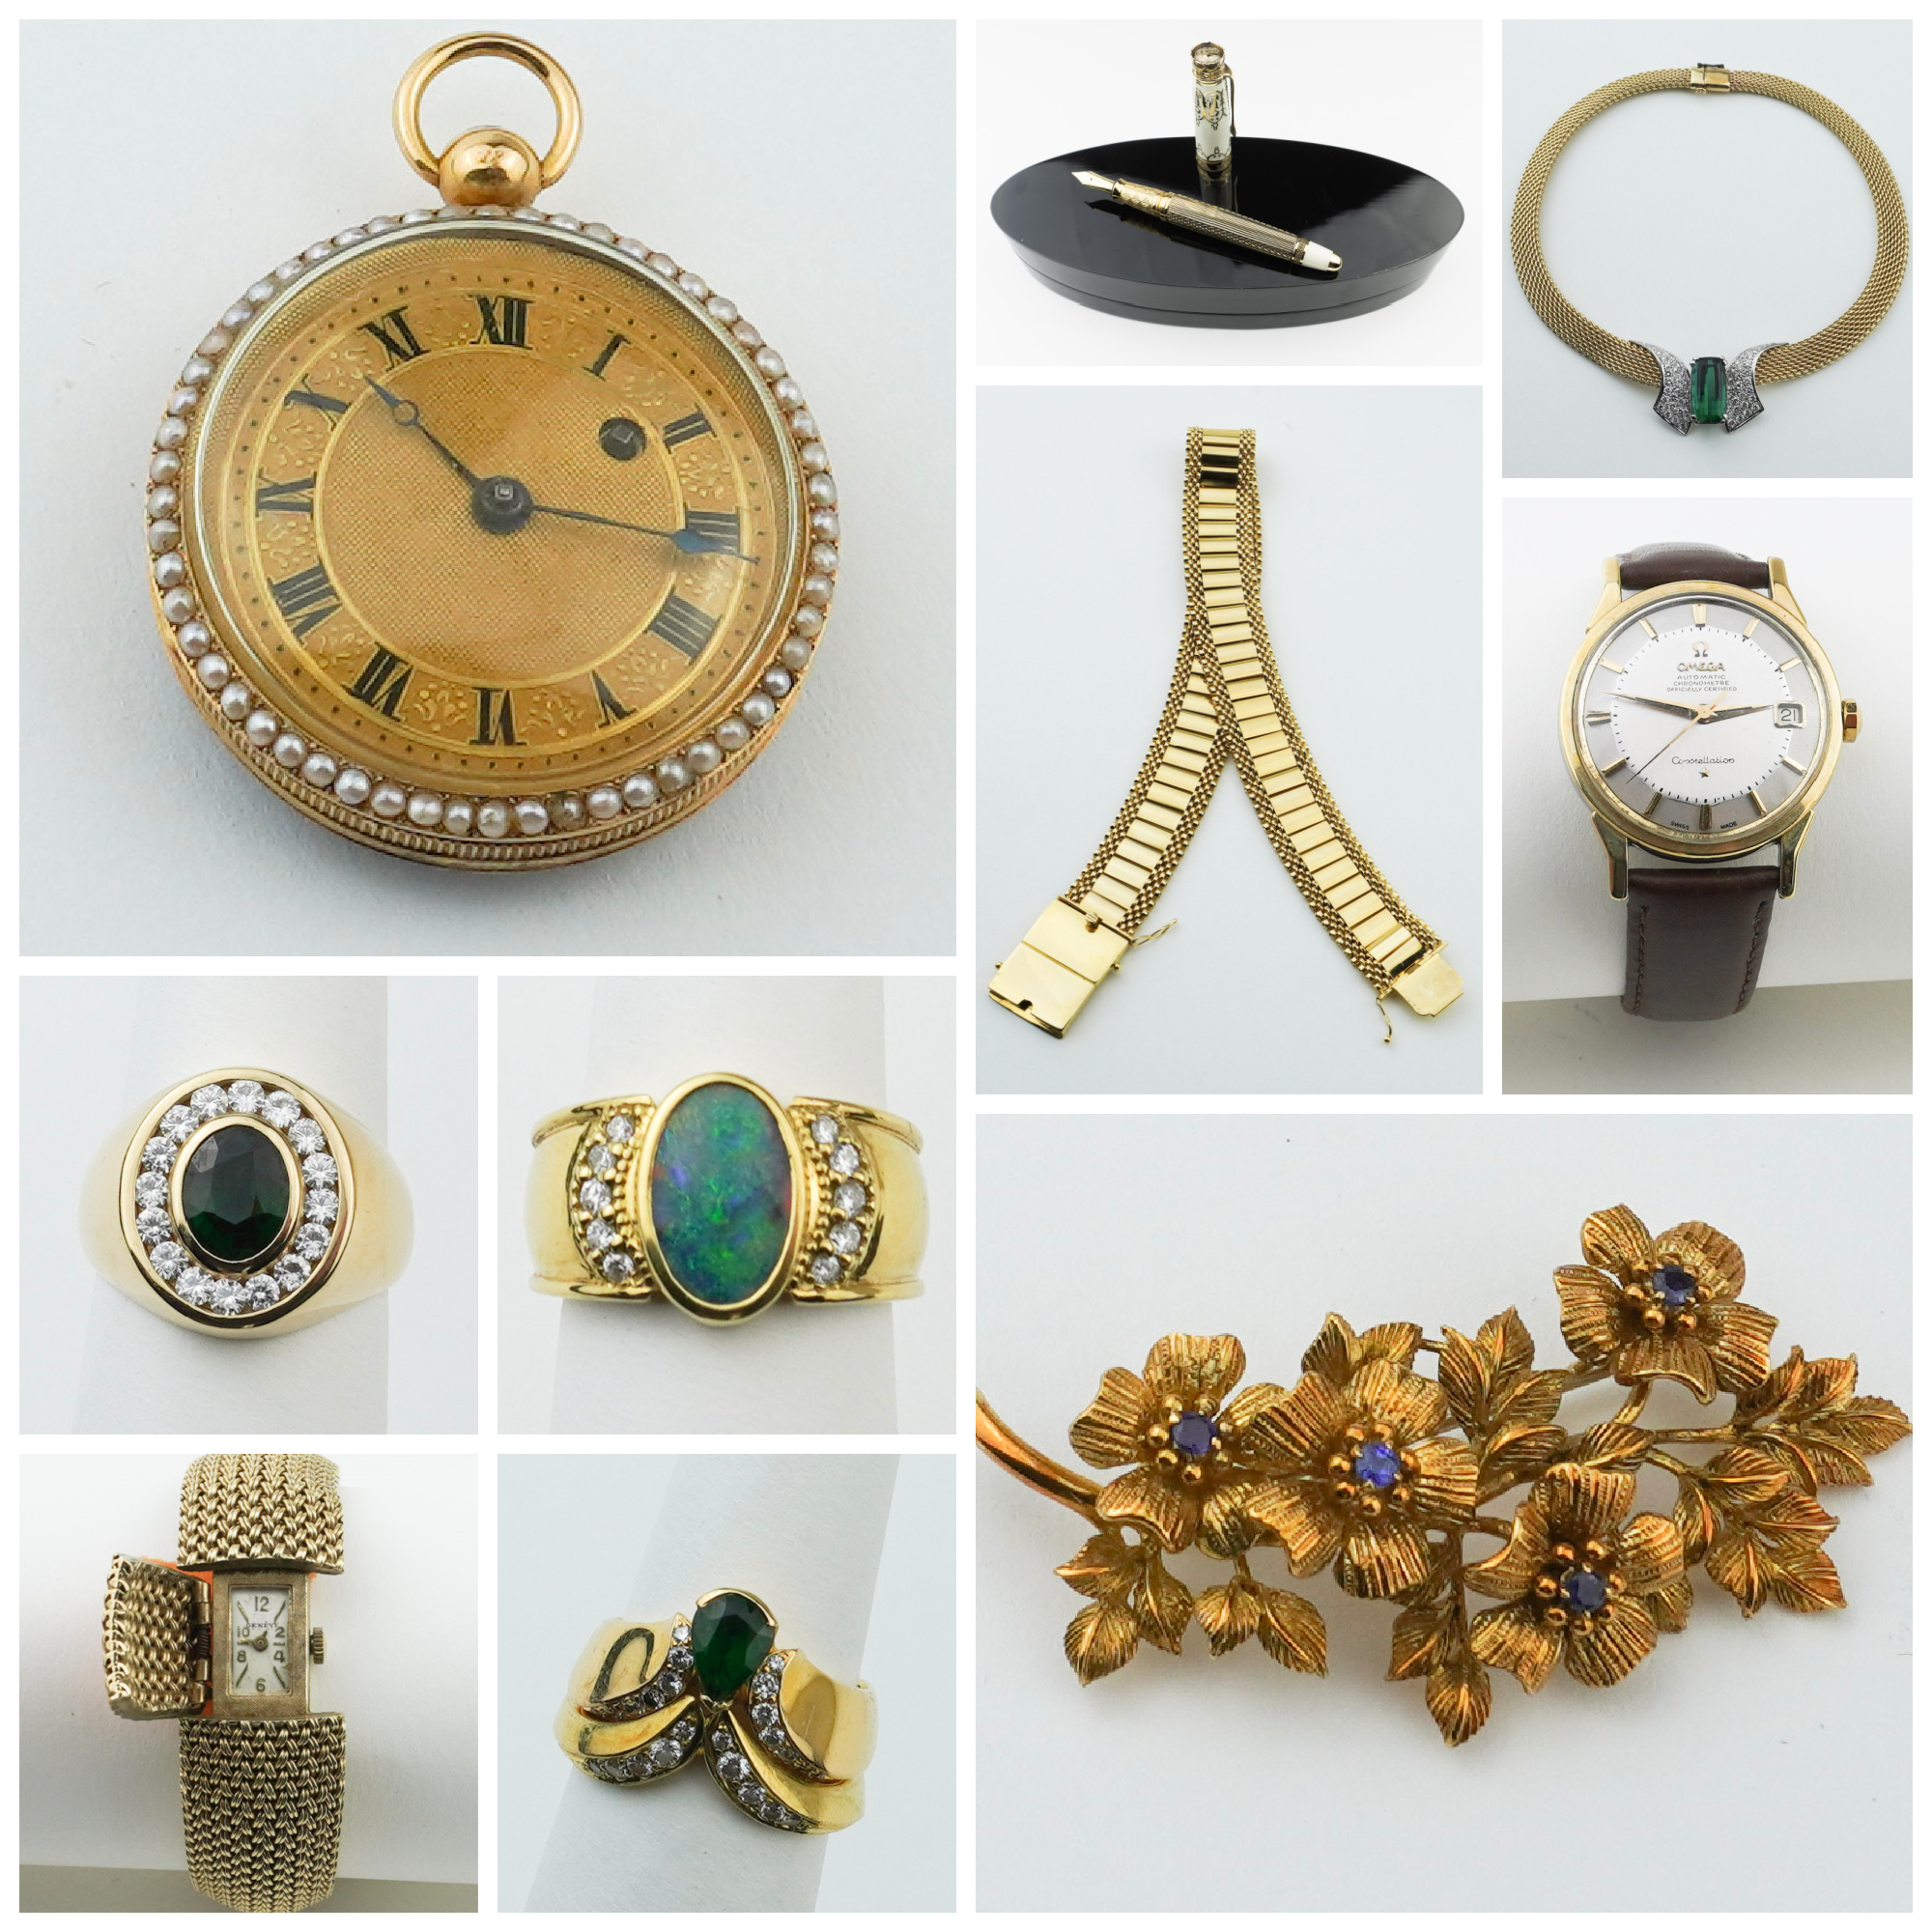 December 13th Fine Jewelry Auction